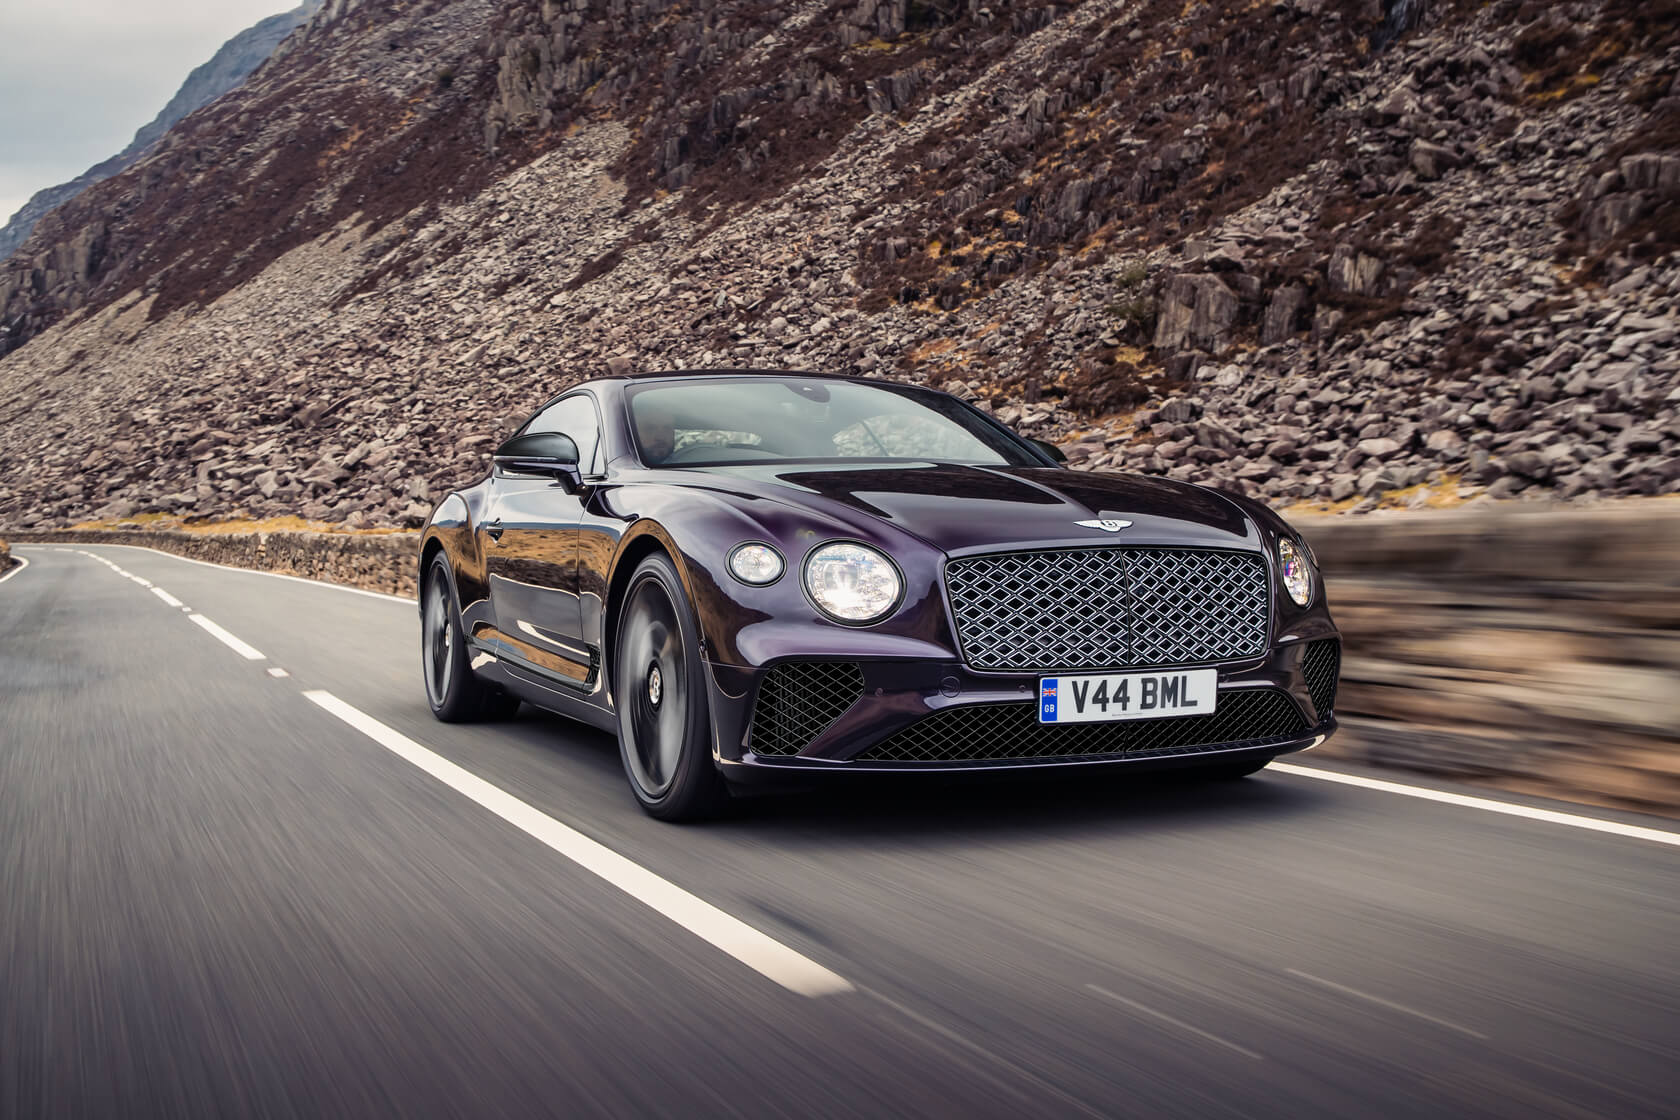 Introducing the Bentley GT Mulliner Blackline - A New Level of Luxury